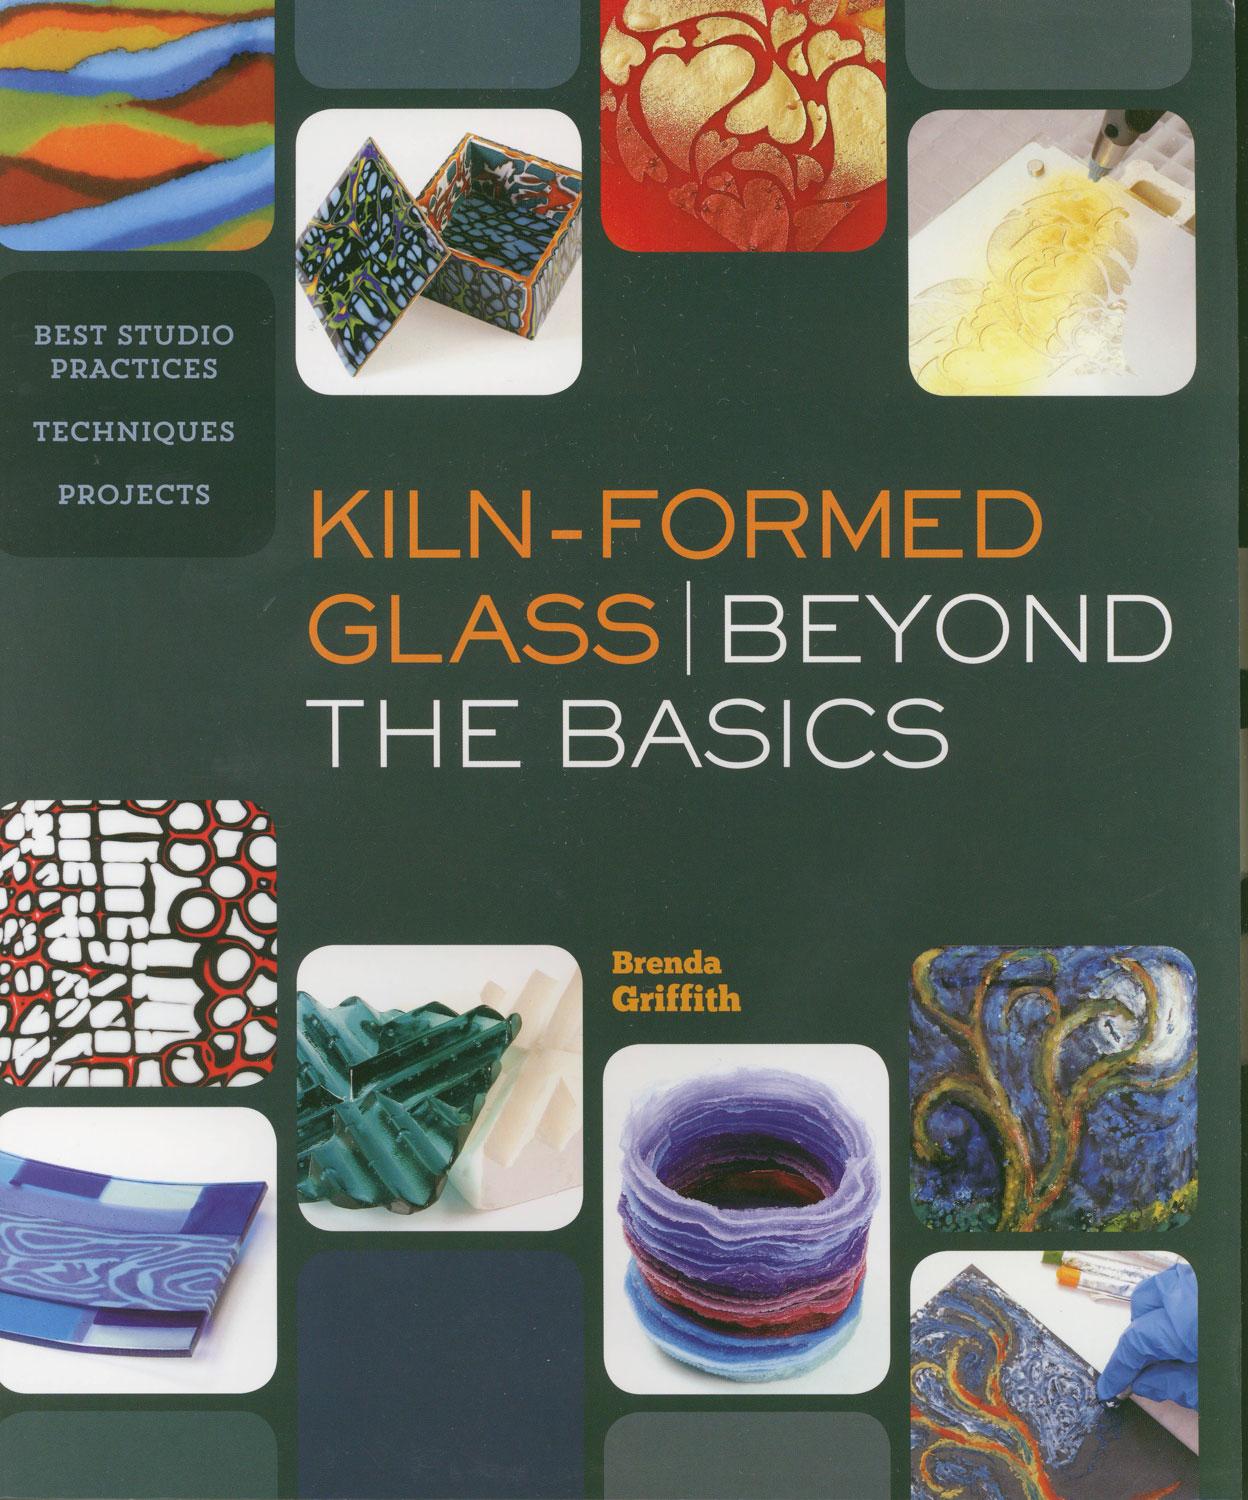 Kiln-Formed Glass: Beyond The Basics, by Brenda Griffith